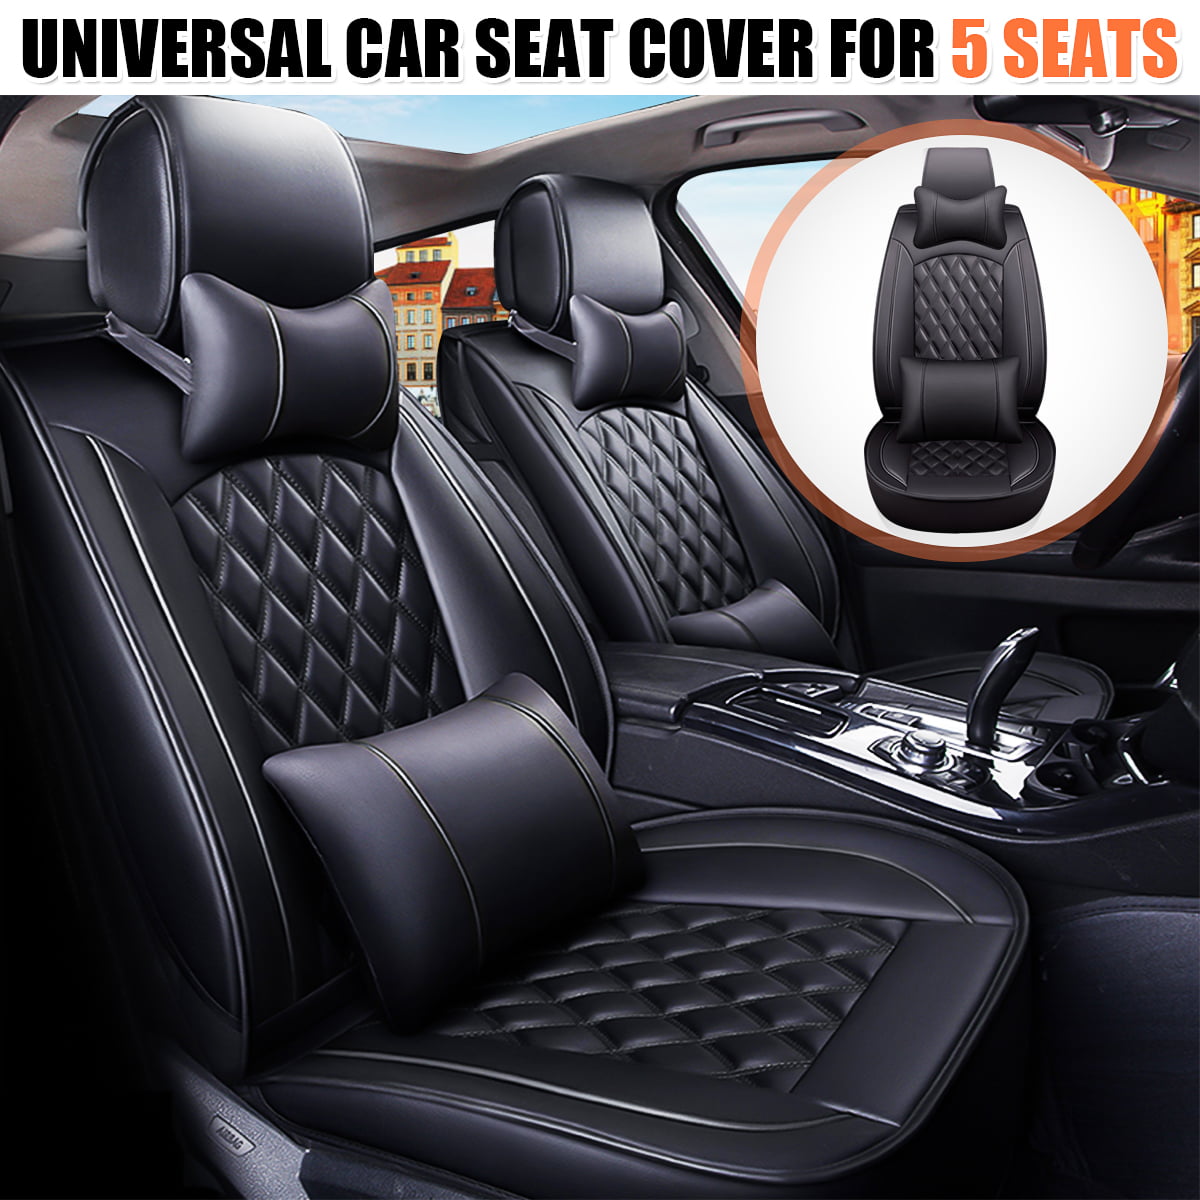 Stockdale Seat Covers for Car,Football Team Logo Seat Protector for Sedan Truck Van SUV Auto,Easy Install 